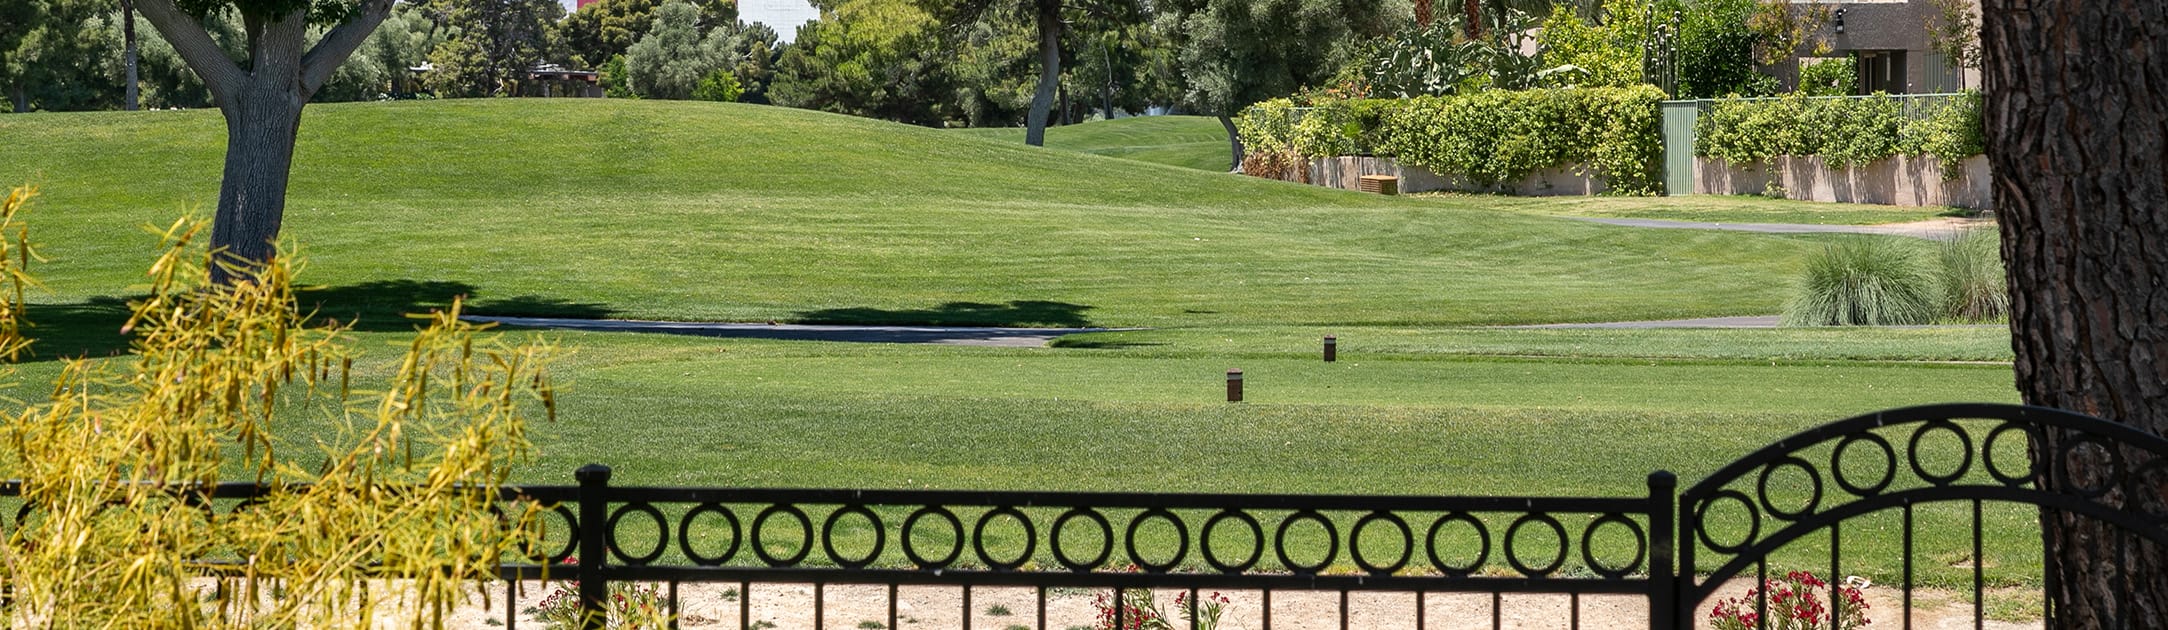 Gold course from view of backyard with an iron rod fence.